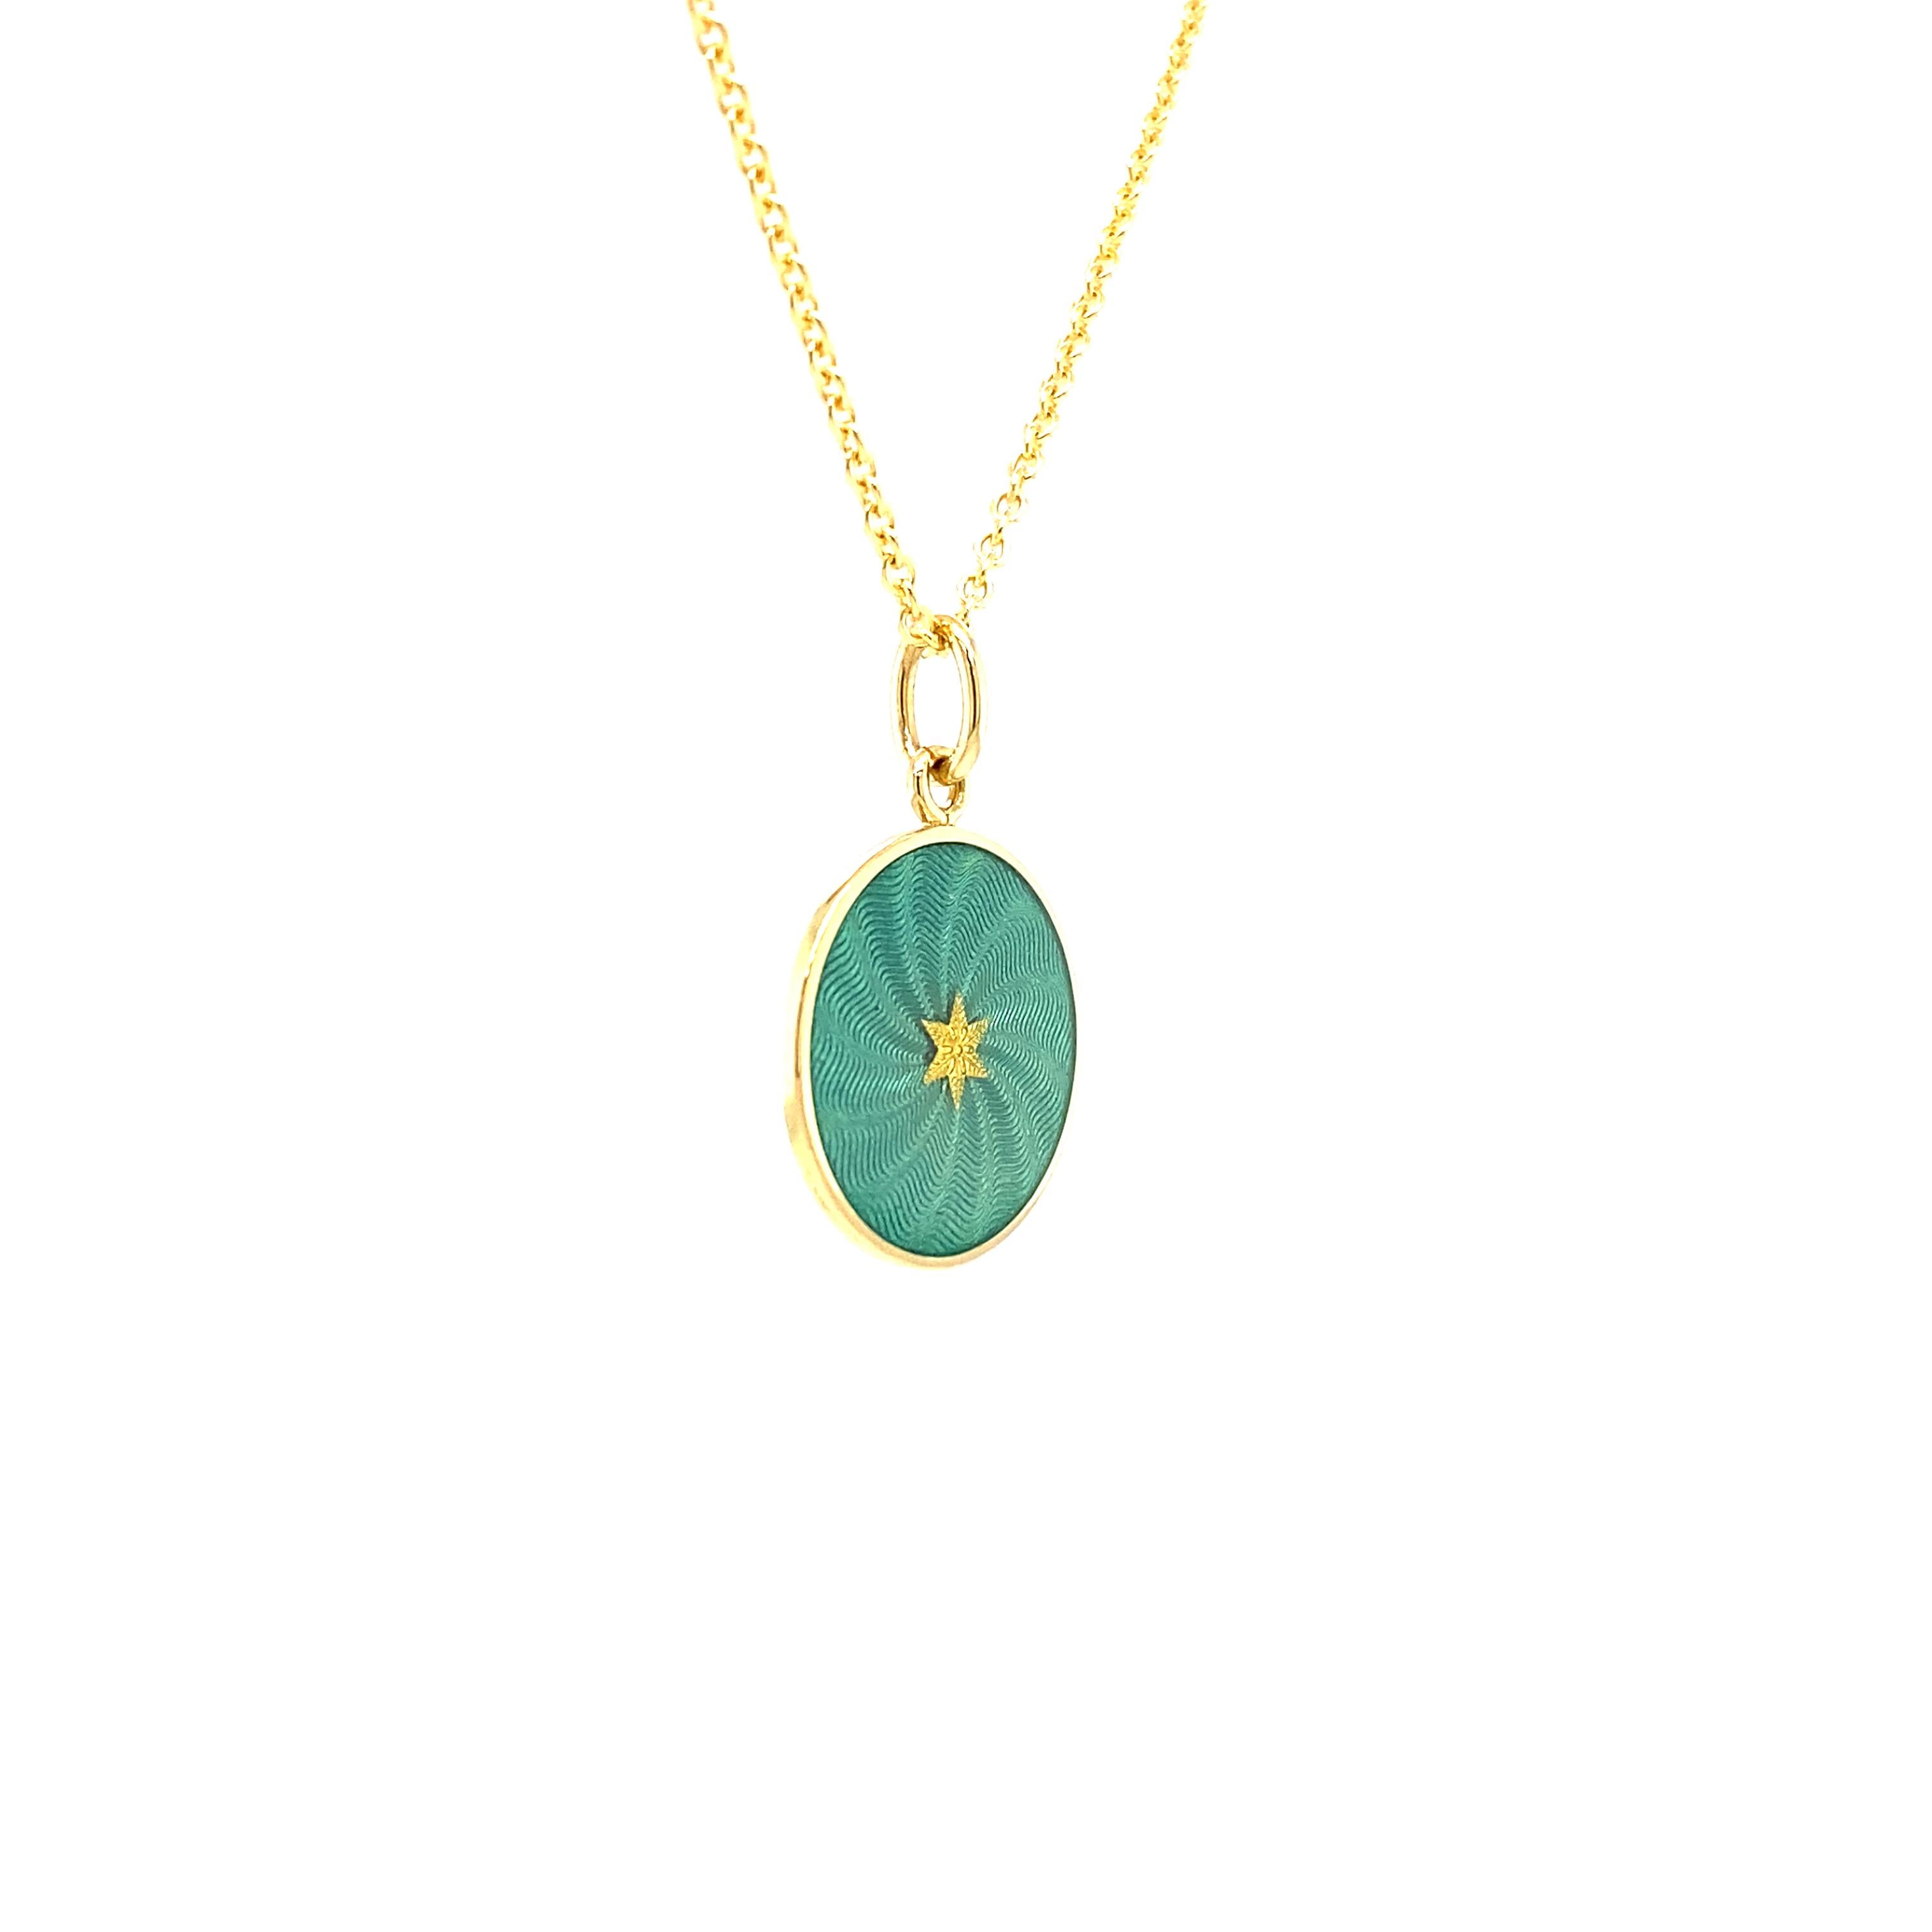 Victorian Round Disk Pendant Necklace 18k Yellow Gold Turquoise Enamel Guilloche Paillons For Sale